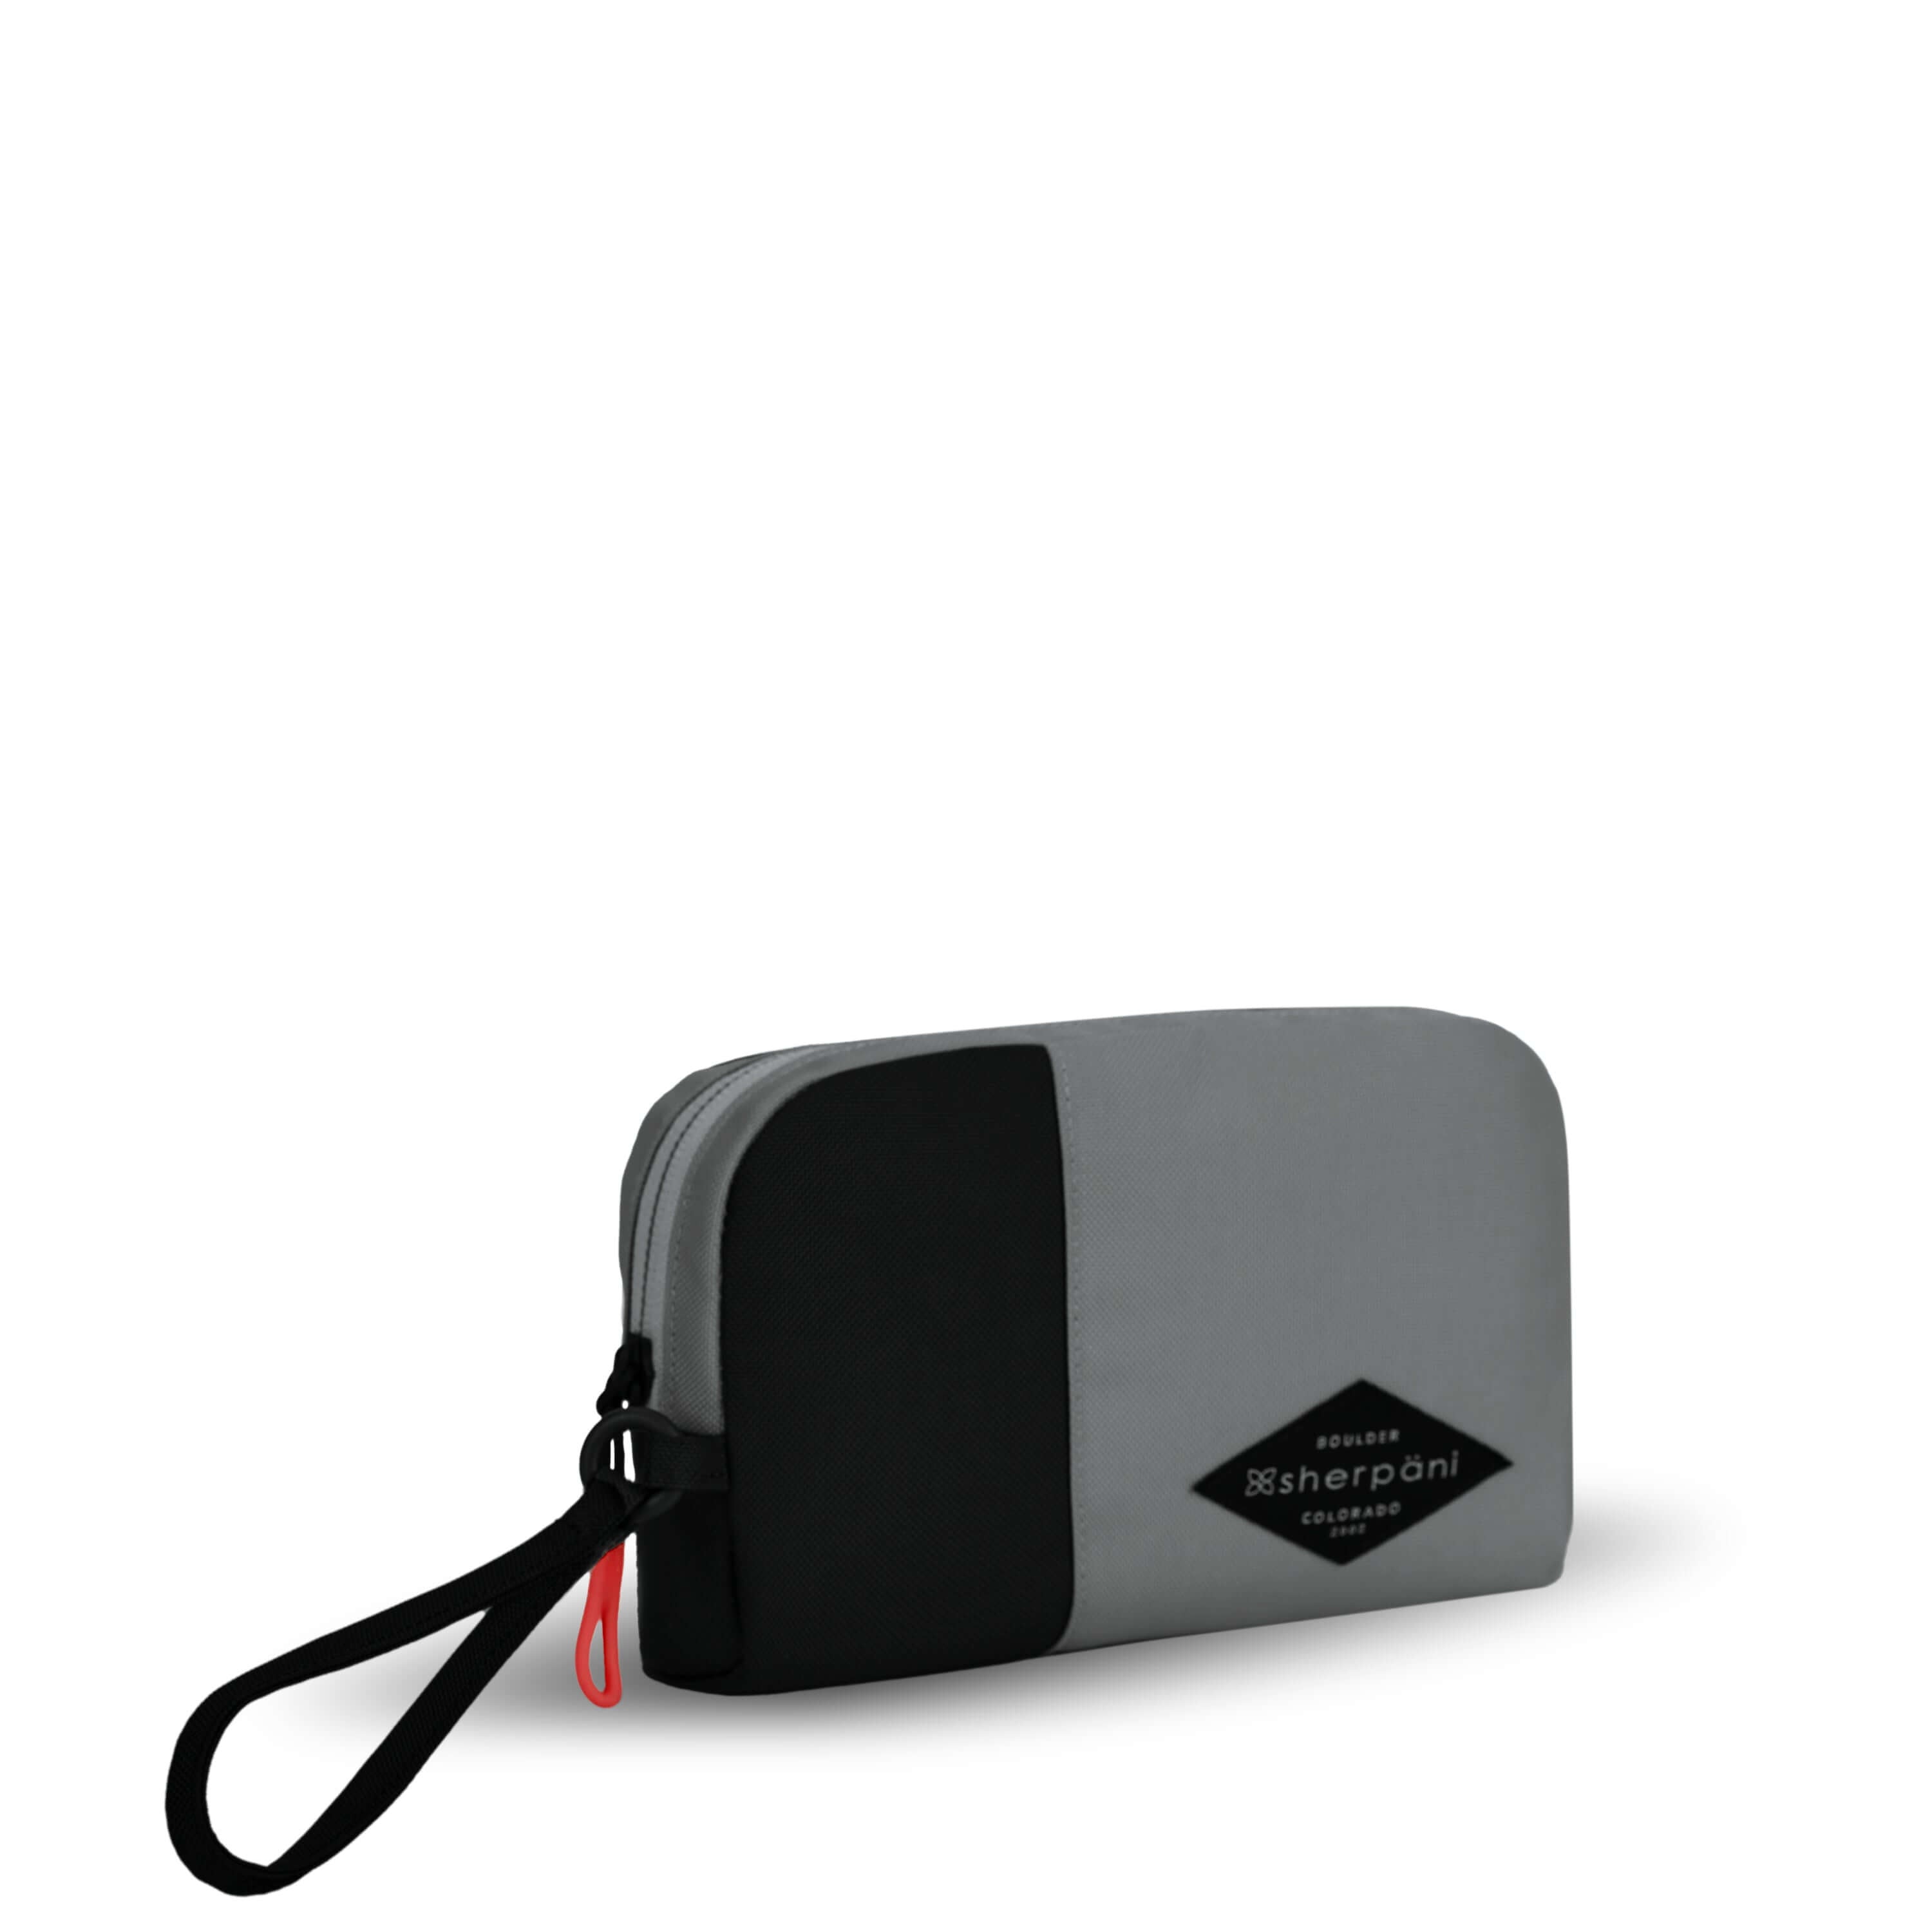 Angled front view of Sherpani travel accessory, the Jolie in Stone, in small size. The pouch is two-toned in gray and black. It features a black wristlet strap and an easy-pull zipper accented in red.